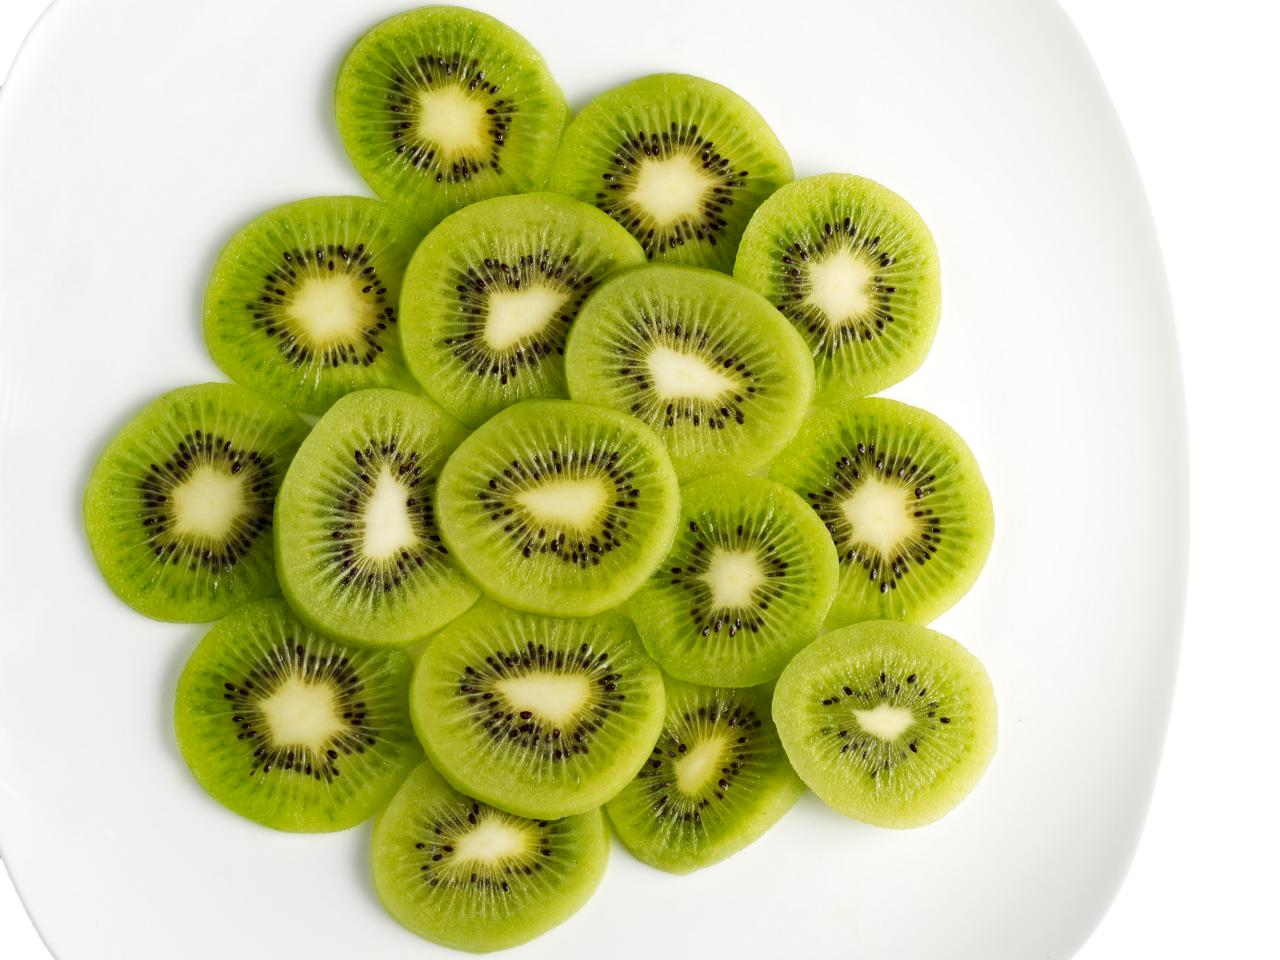 How to Cut a Kiwi Fruit With 3 Simple Kitchen Tools